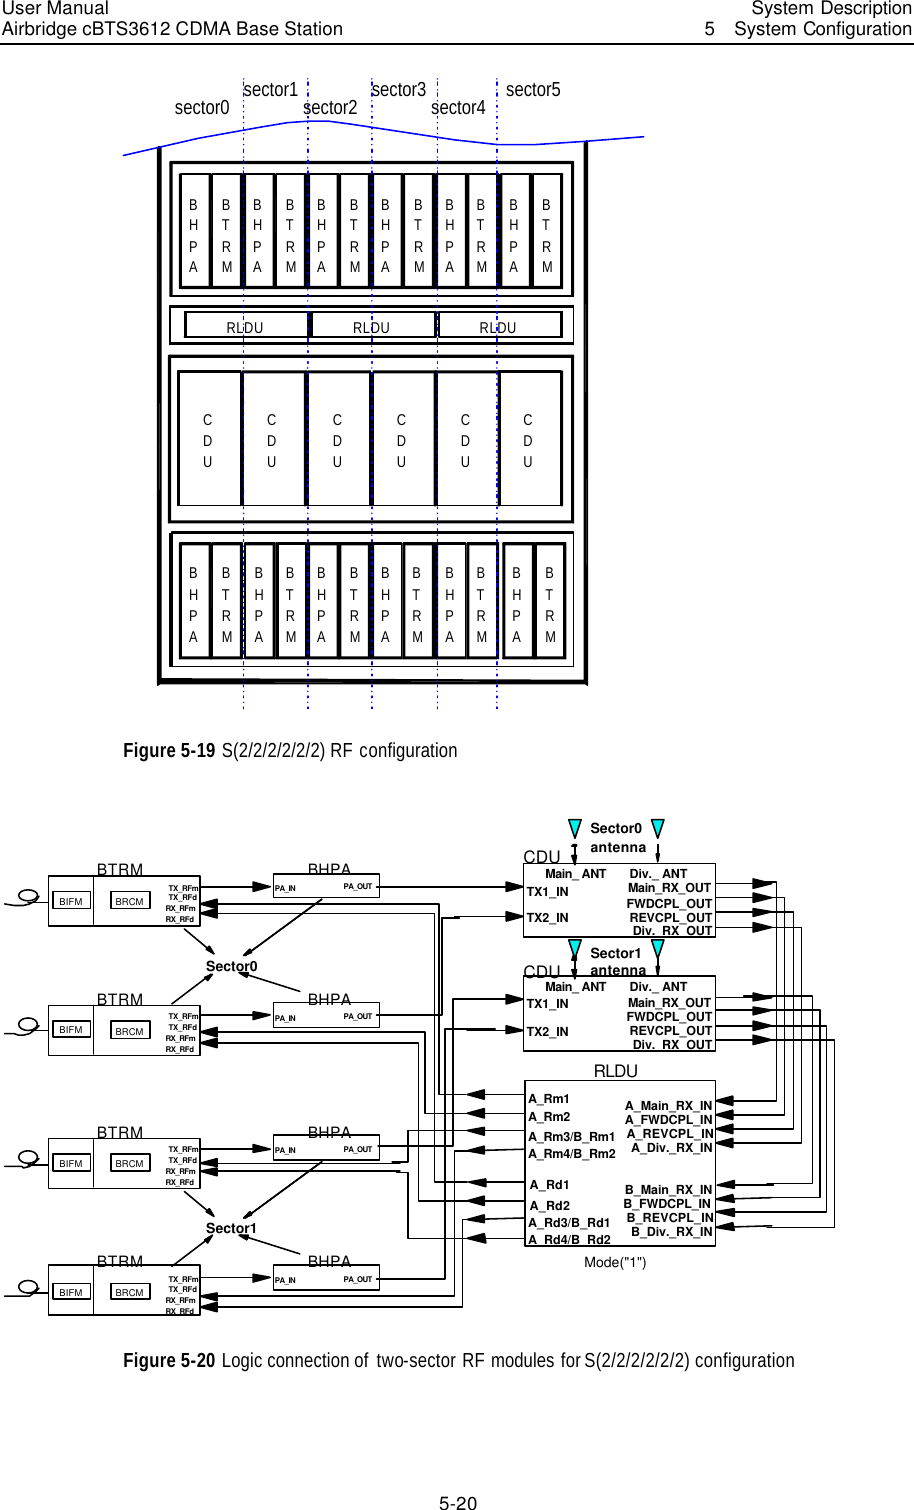 User Manual Airbridge cBTS3612 CDMA Base Station   System Description5  System Configuration 5-20 CDUBHPABTRMRLDUCDUCDUBHPABTRMBHPABTRMRLDU RLDUBHPABTRMBHPABTRMBHPABTRMBHPABTRMBHPABTRMBHPABTRMsector2 sector5sector3CDUCDUCDUBHPABTRMBHPABTRMBHPABTRMsector1 sector4sector0 Figure 5-19 S(2/2/2/2/2/2) RF configuration   TX1_INTX2_INMain_ ANT Div._ ANTMain_RX_OUTDiv._RX_OUTFWDCPL_OUTREVCPL_OUTCDUA_Main_RX_INA_Div._RX_INA_FWDCPL_INA_REVCPL_INB_Main_RX_INB_Div._RX_INB_FWDCPL_INB_REVCPL_INA_Rm1A_Rm2A_Rm3/B_Rm1A_Rm4/B_Rm2A_Rd1A_Rd2A_Rd3/B_Rd1A_Rd4/B_Rd2RLDUMode(&quot;1&quot;)TX1_INTX2_INMain_ ANT Div._ ANTMain_RX_OUTDiv._RX_OUTFWDCPL_OUTREVCPL_OUTCDUSector0antennaSector0BHPAPA_IN PA_OUTTX_RFmRX_RFmRX_RFdTX_RFdBTRMBRCMBIFMBHPAPA_IN PA_OUTTX_RFmRX_RFmRX_RFdTX_RFdBTRMBRCMBIFMSector1BHPAPA_IN PA_OUTTX_RFmRX_RFmRX_RFdTX_RFdBTRMBRCMBIFMBHPAPA_IN PA_OUTTX_RFmRX_RFmRX_RFdTX_RFdBTRMBRCMBIFMSector1antenna Figure 5-20 Logic connection of  two-sector  RF modules for S(2/2/2/2/2/2) configuration 